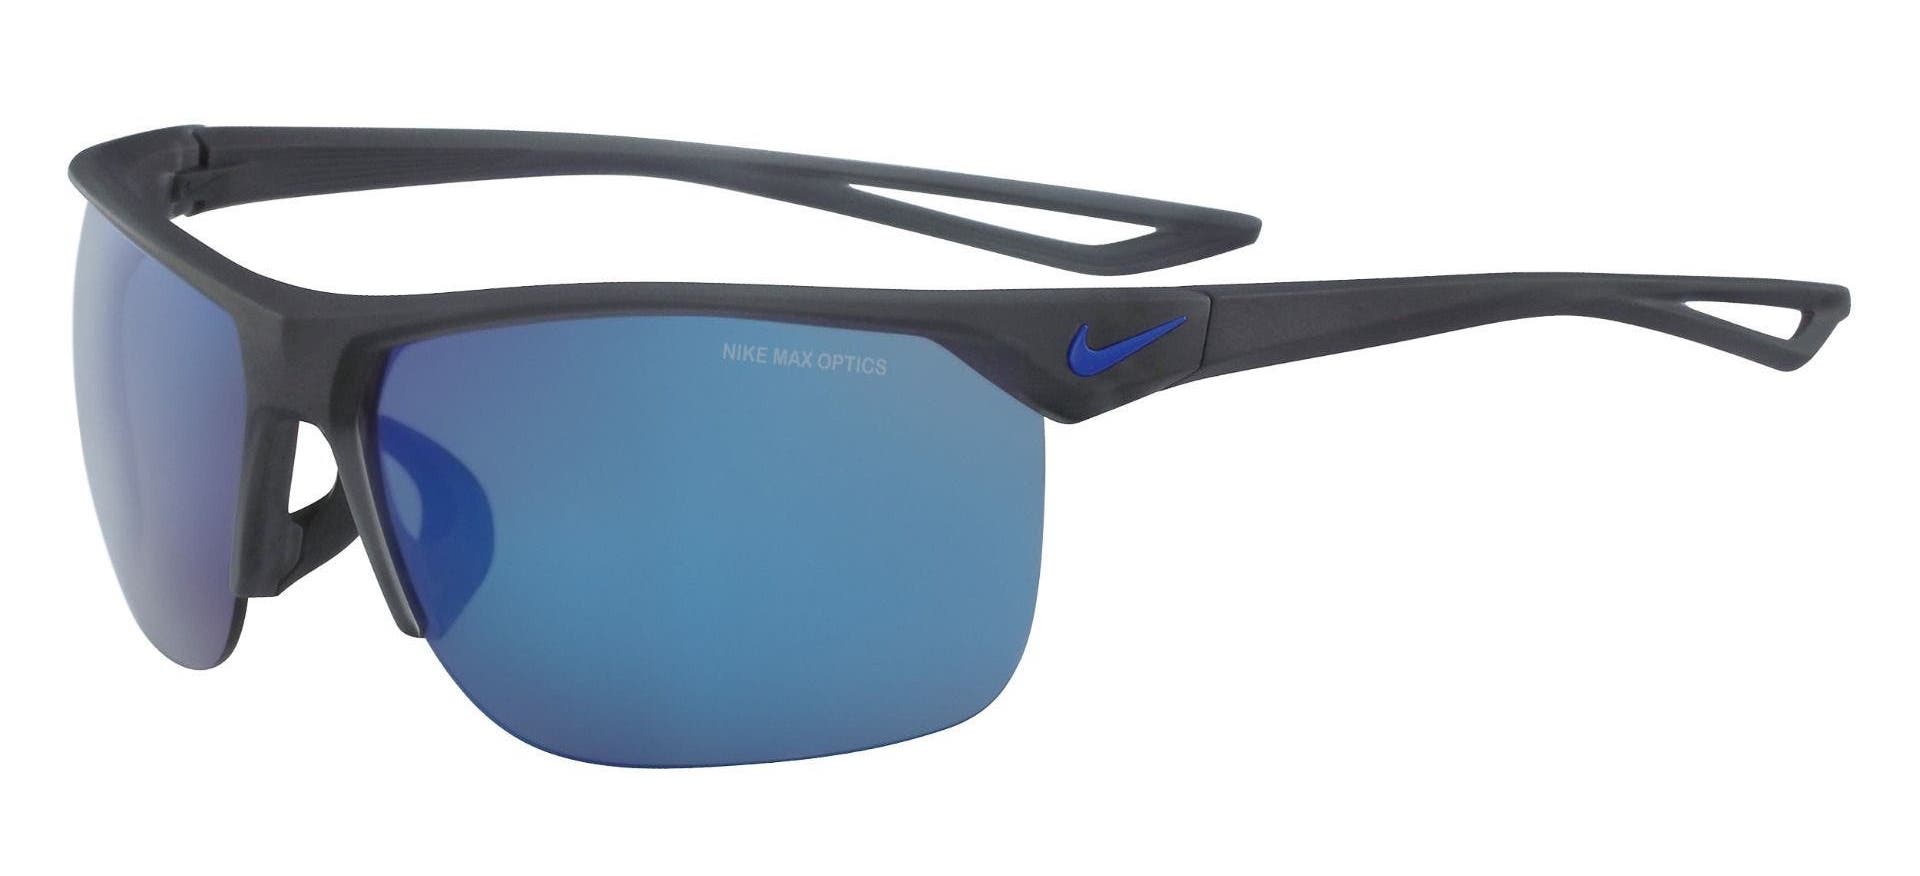 nike trainer sunglasses in matte grey with blue mirror lenses